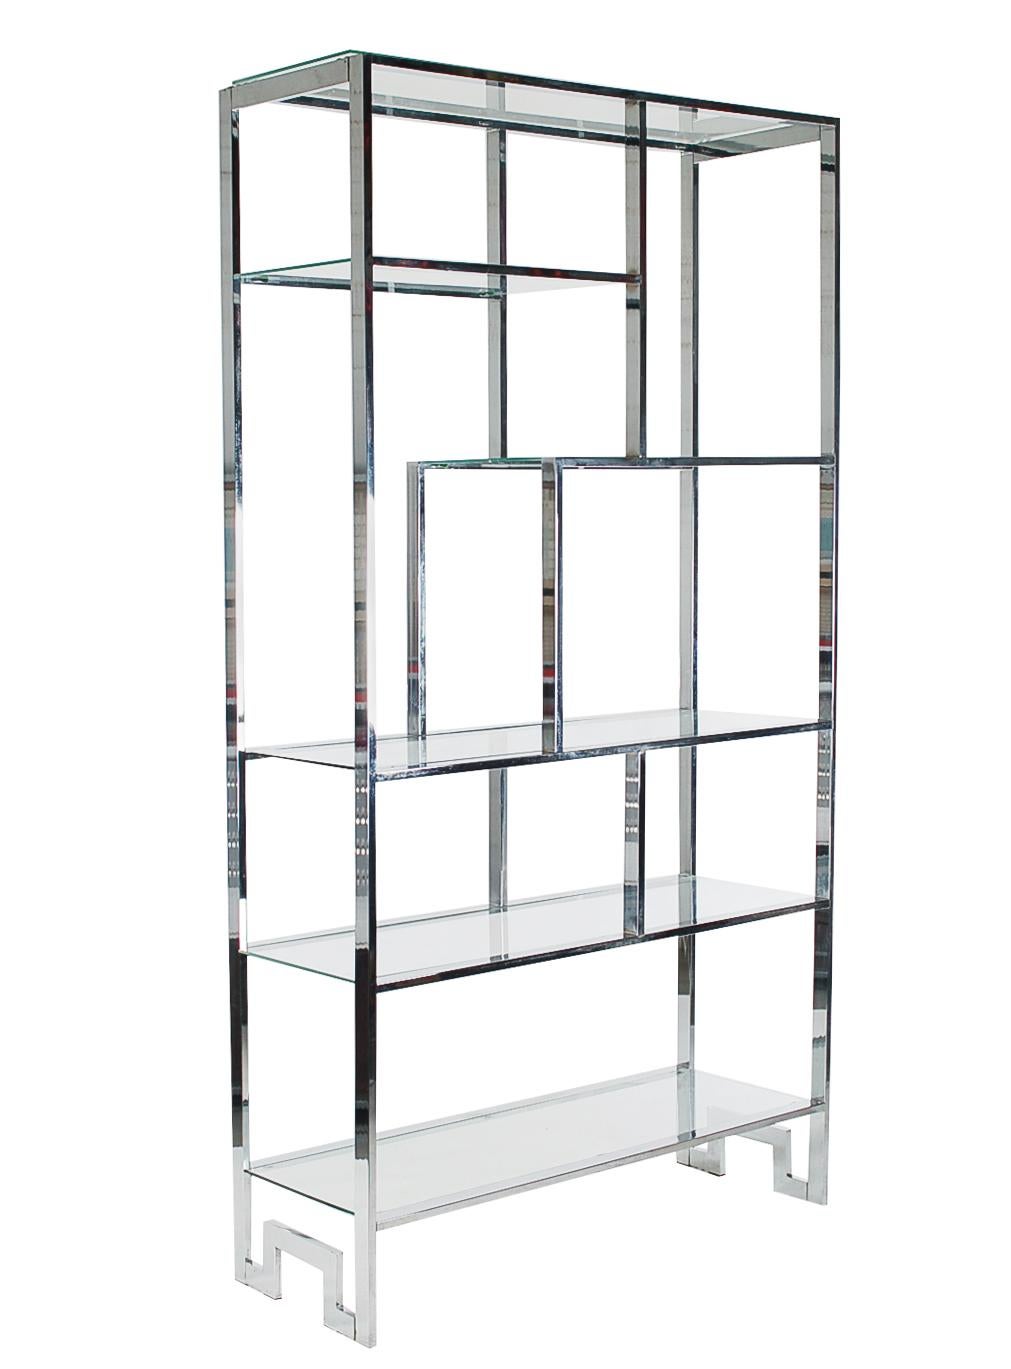 American Matching Pair of Mid-Century Modern Chrome and Glass Etagere after Milo Baughman